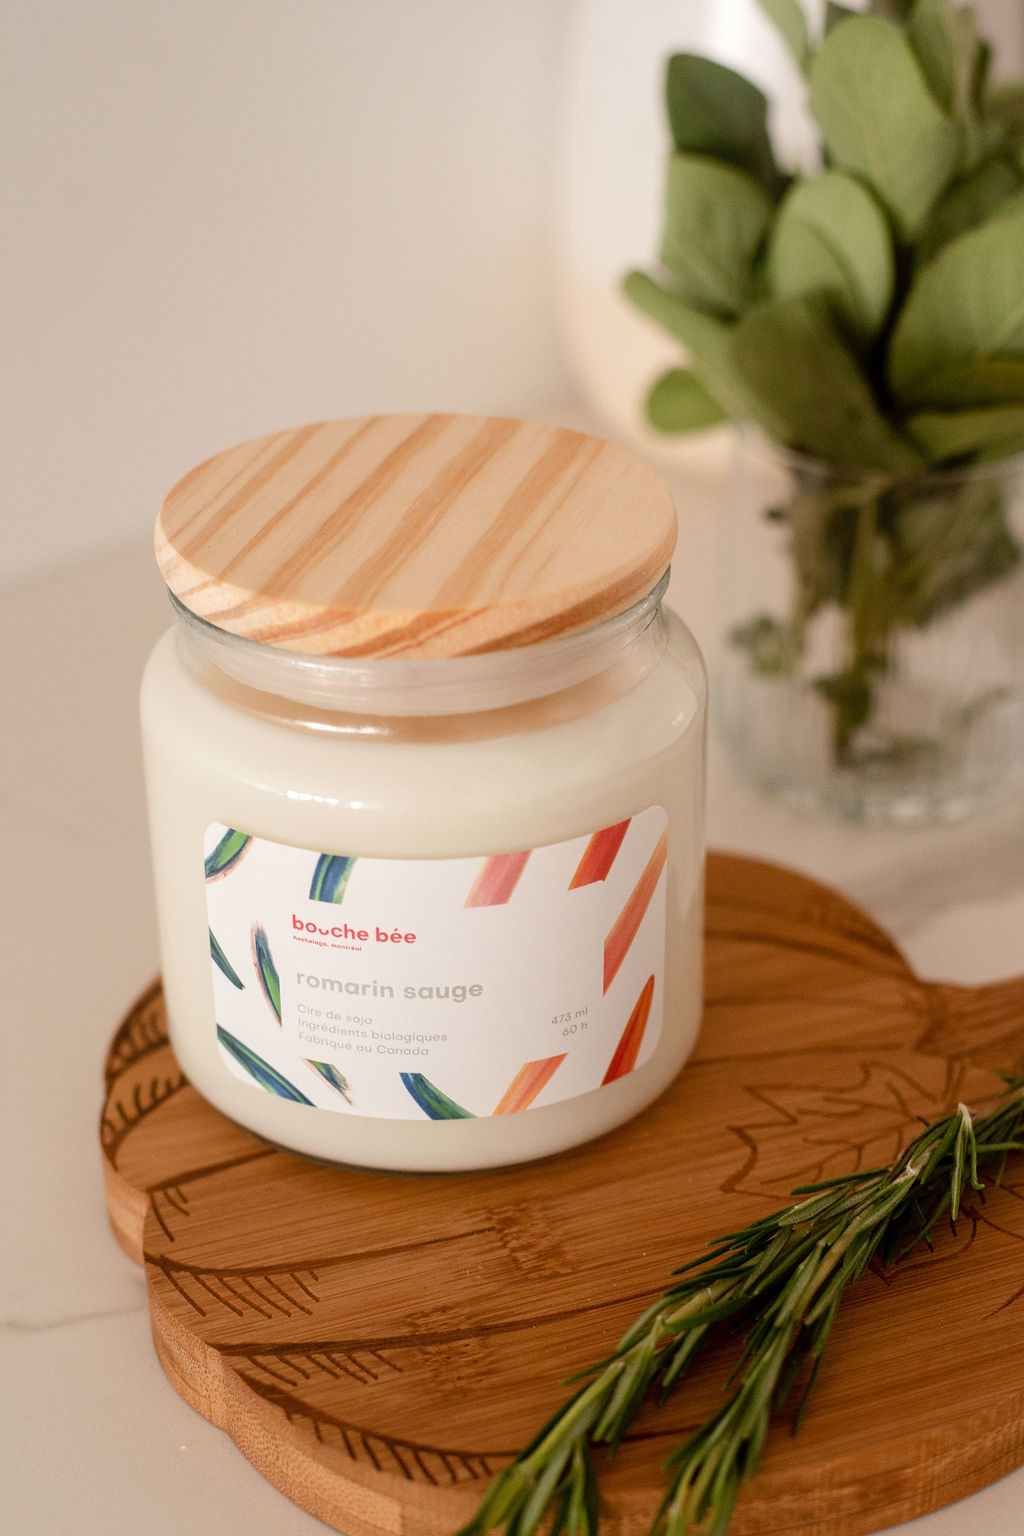 Rosemary sage candle